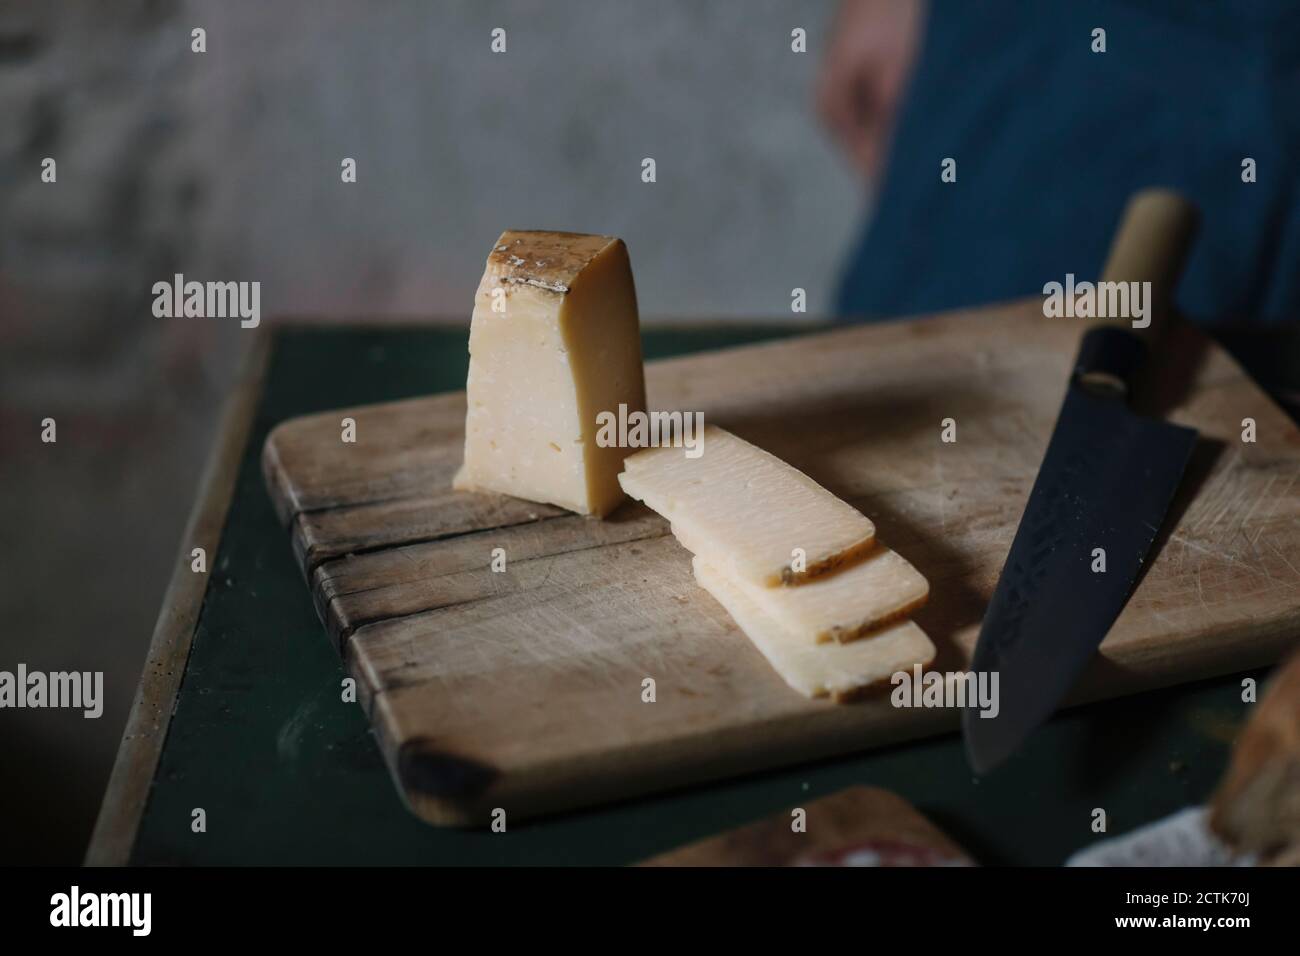 Close-up of artisanal cheese slices with knife on cutting board Stock Photo